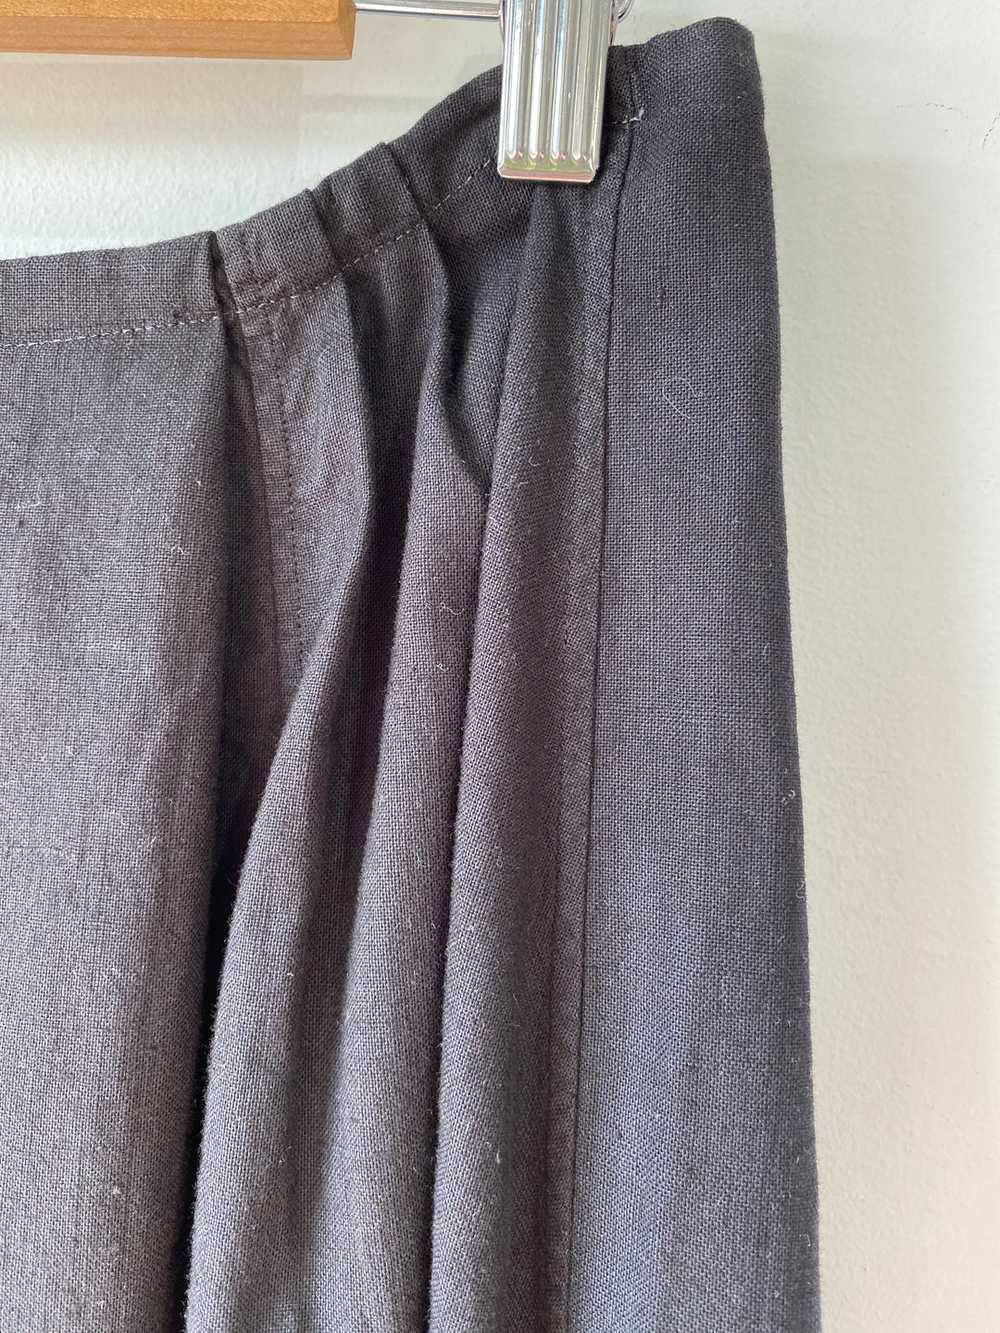 Vintage Overdyed Victorian Skirt with Lace - image 4